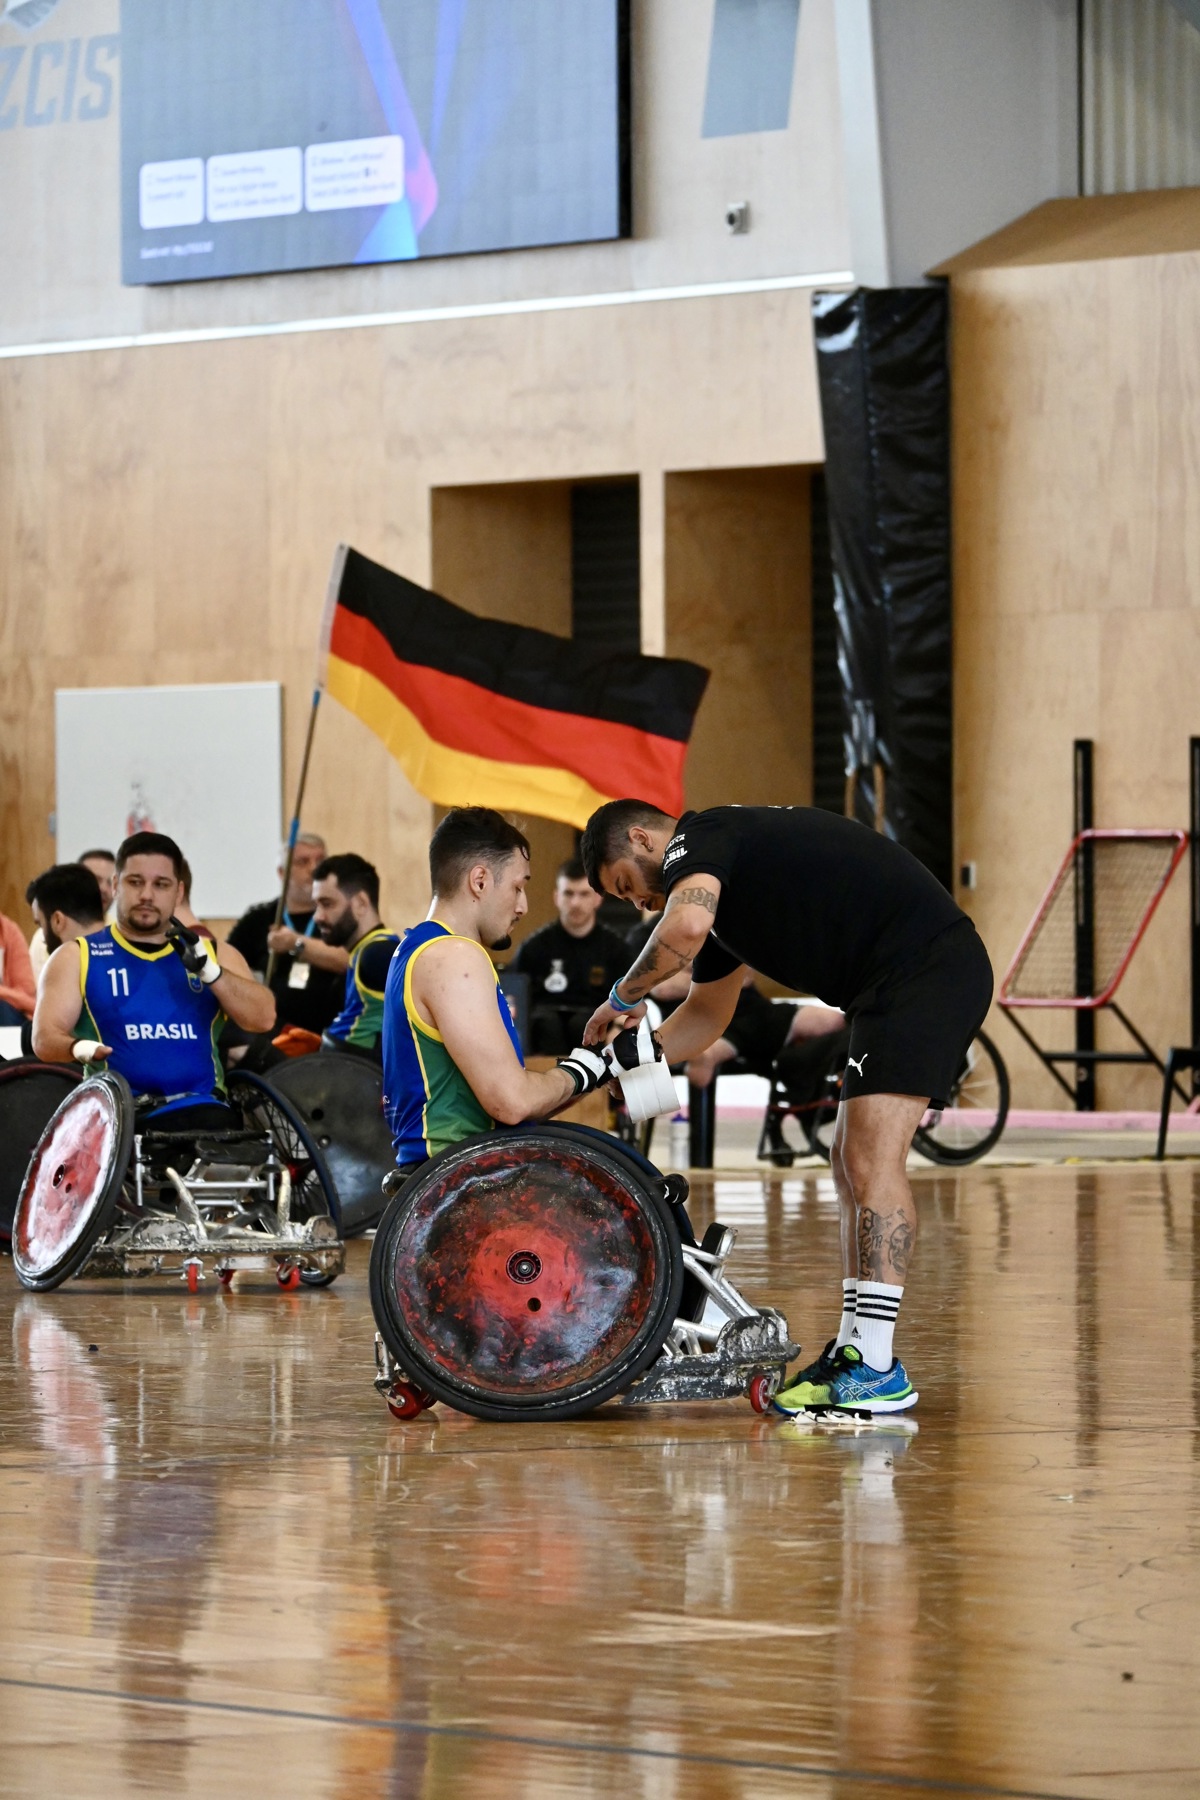 A Brazilian wheelchair rugby athlete has his hands wrapped up on the court. There is a Germany flag being waved behind him.